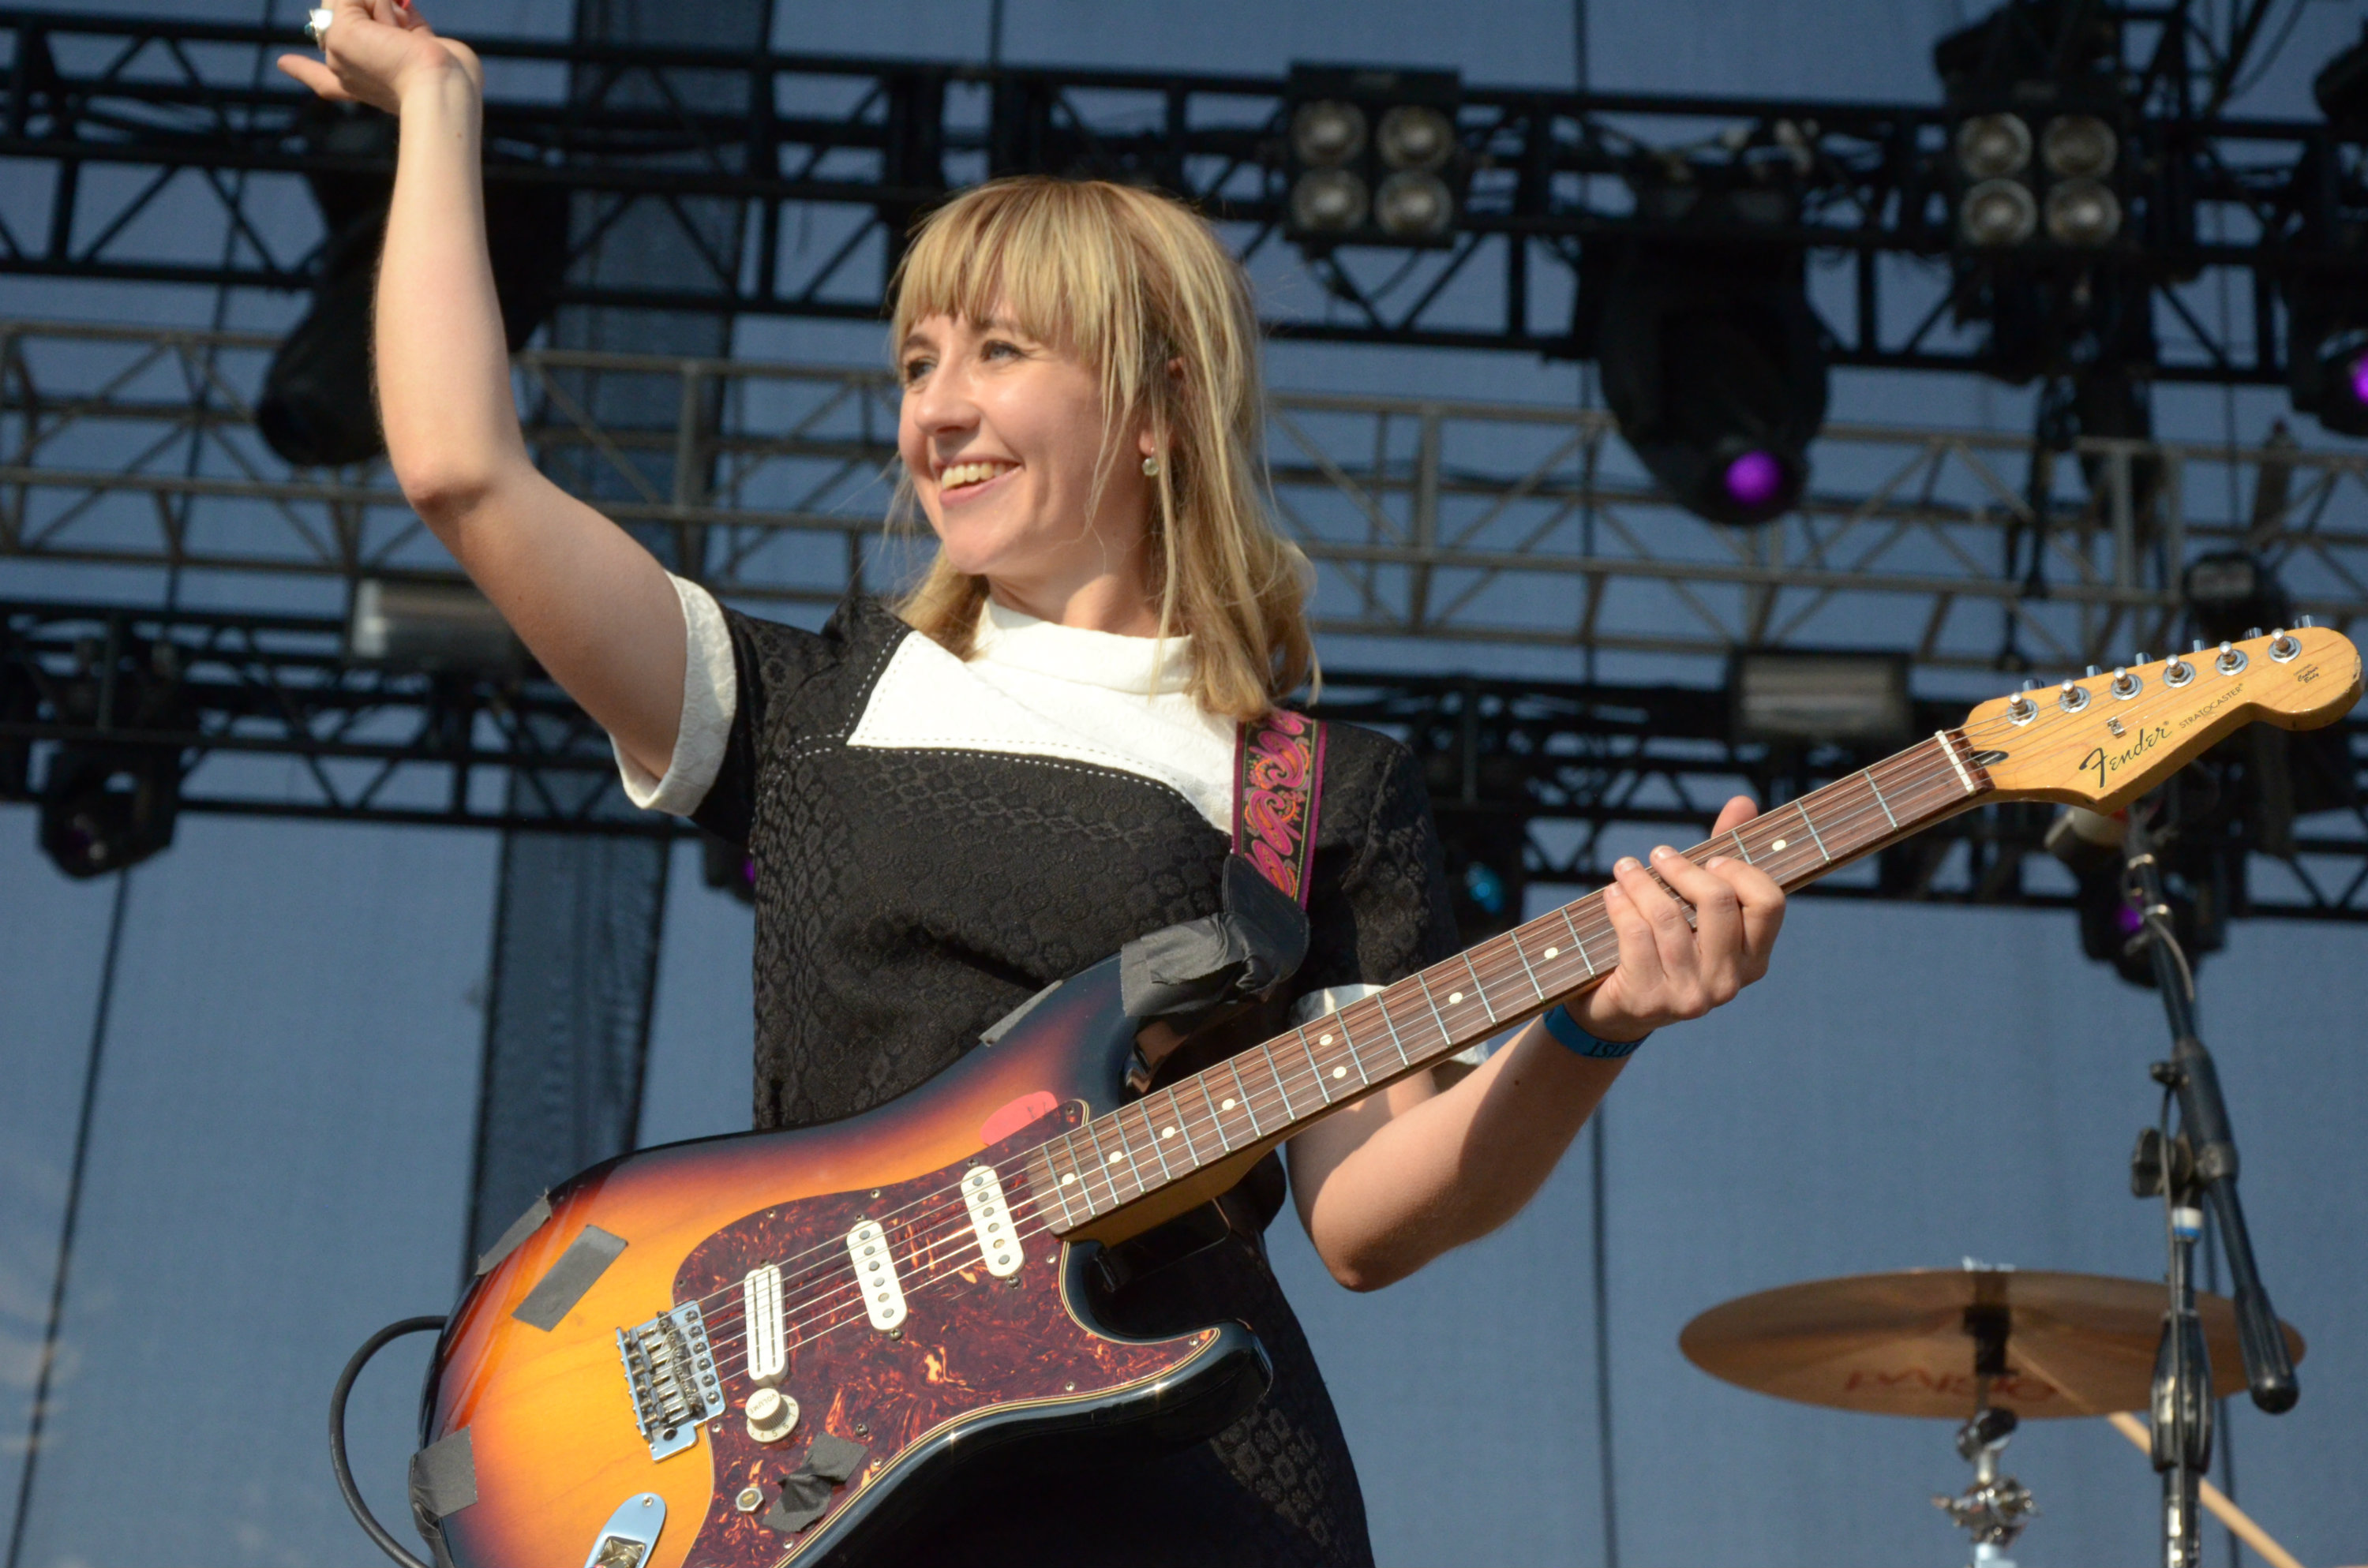 Photo: The Joy Formidable at Riot Fest 2015